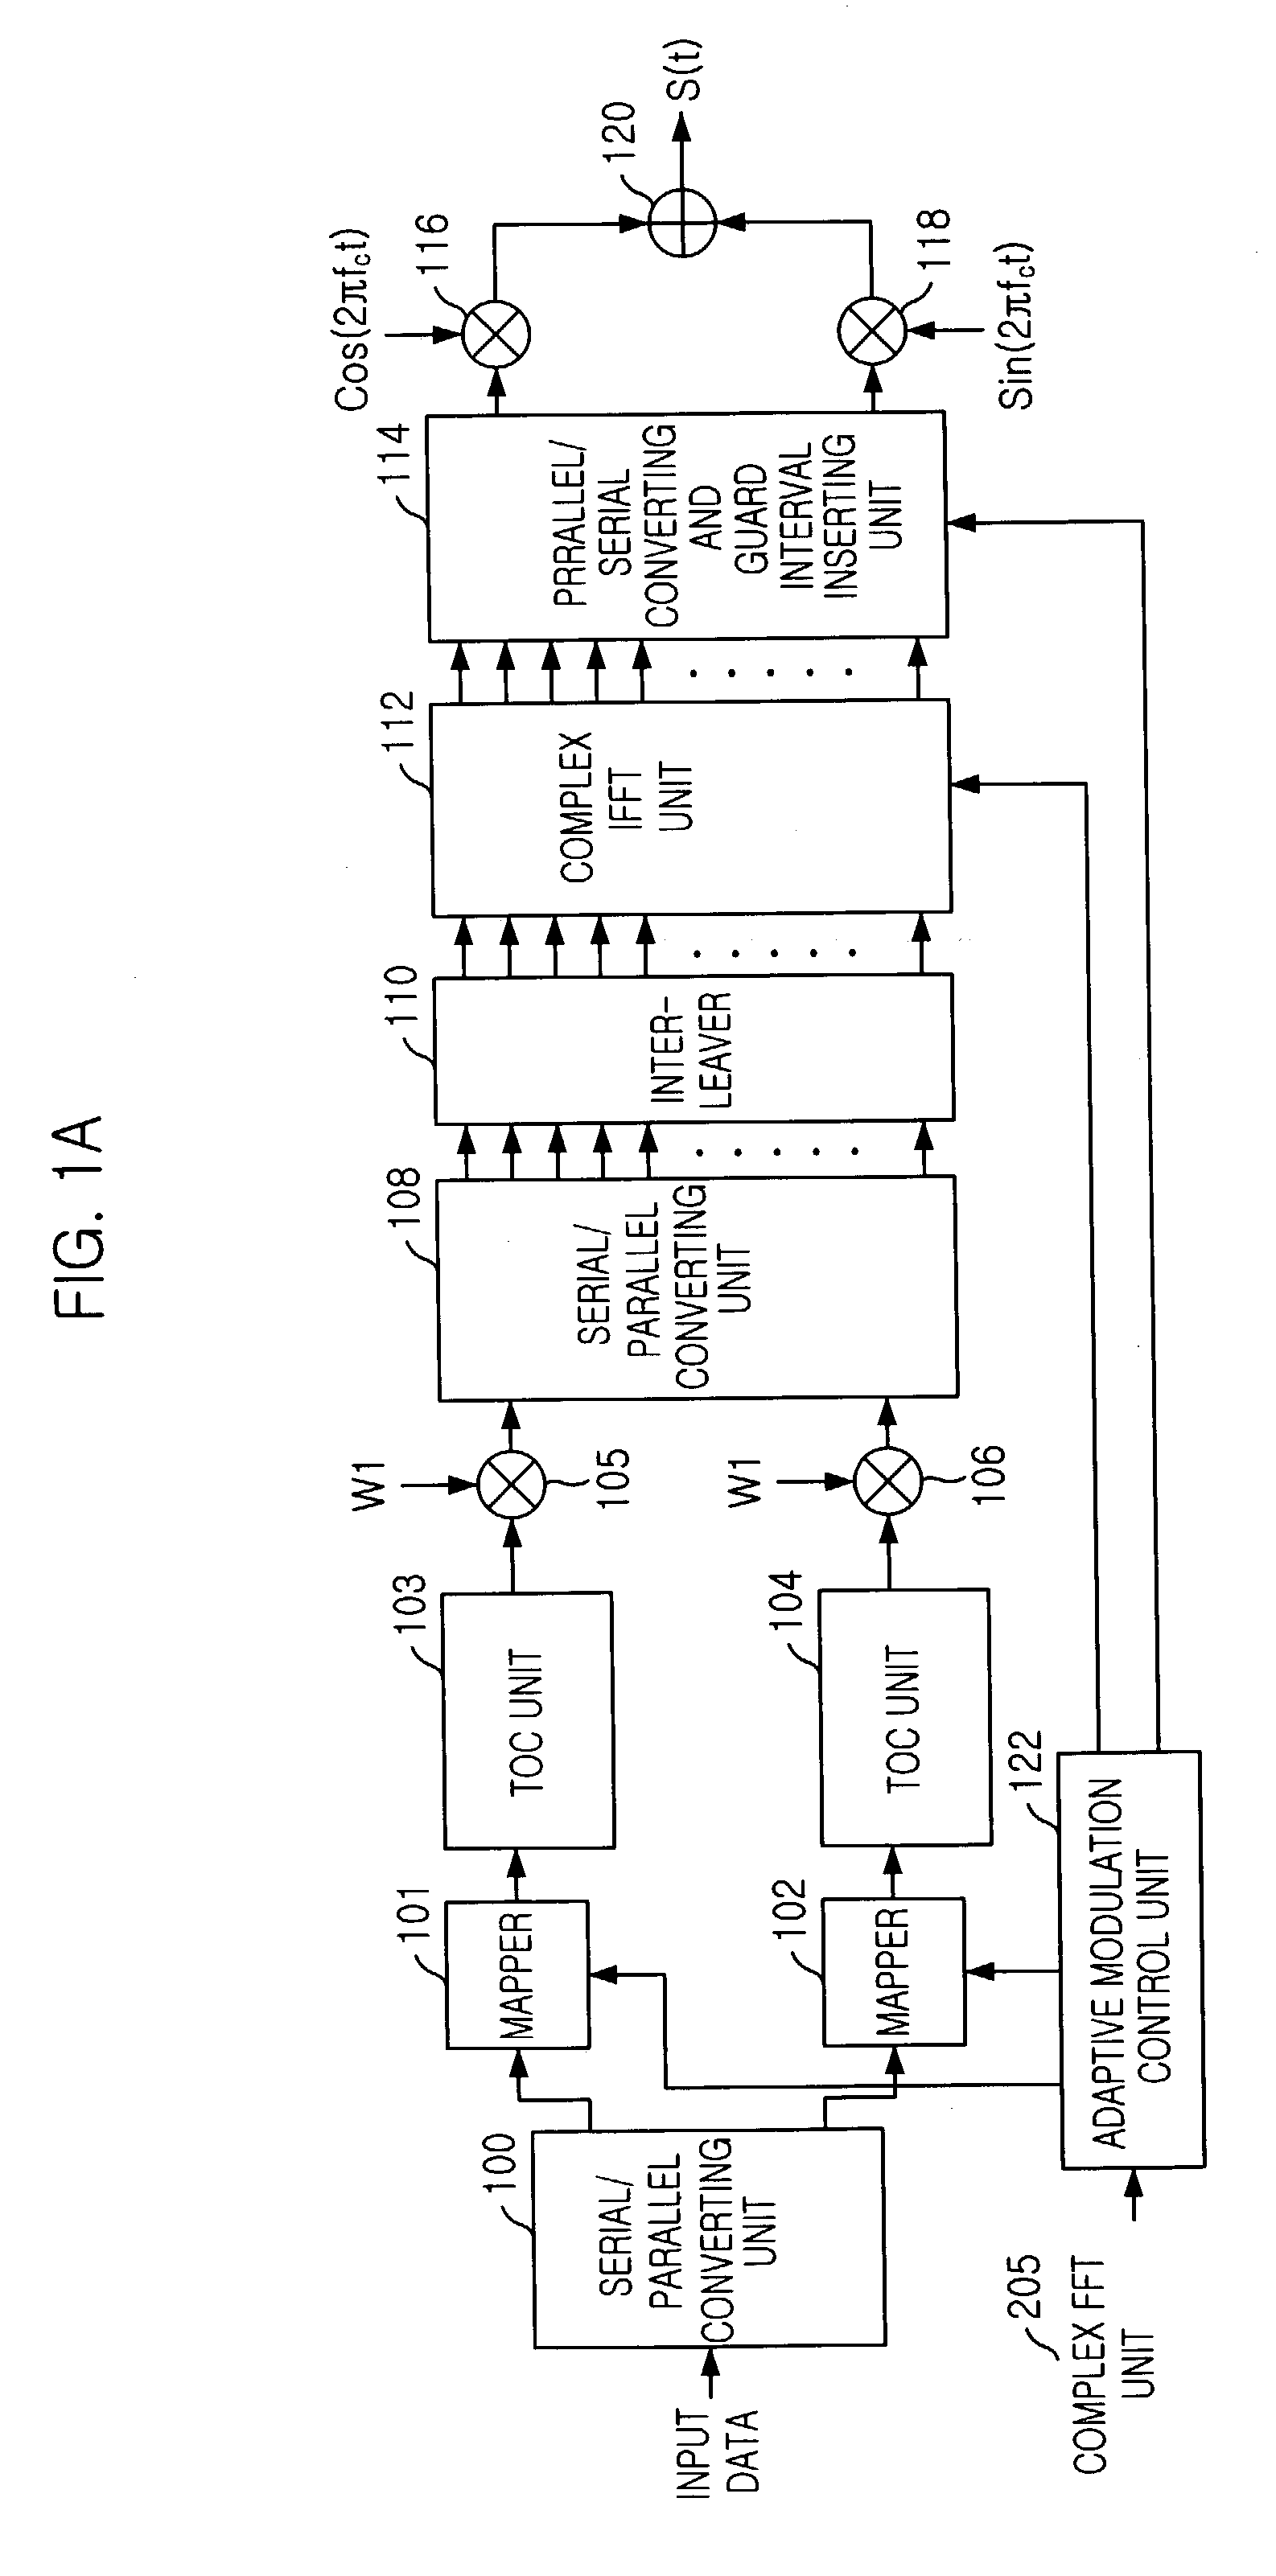 Apparatus for transmitting and receiving signal using orthogonal codes and non-binary values in CDMA/OFDM system and method thereof